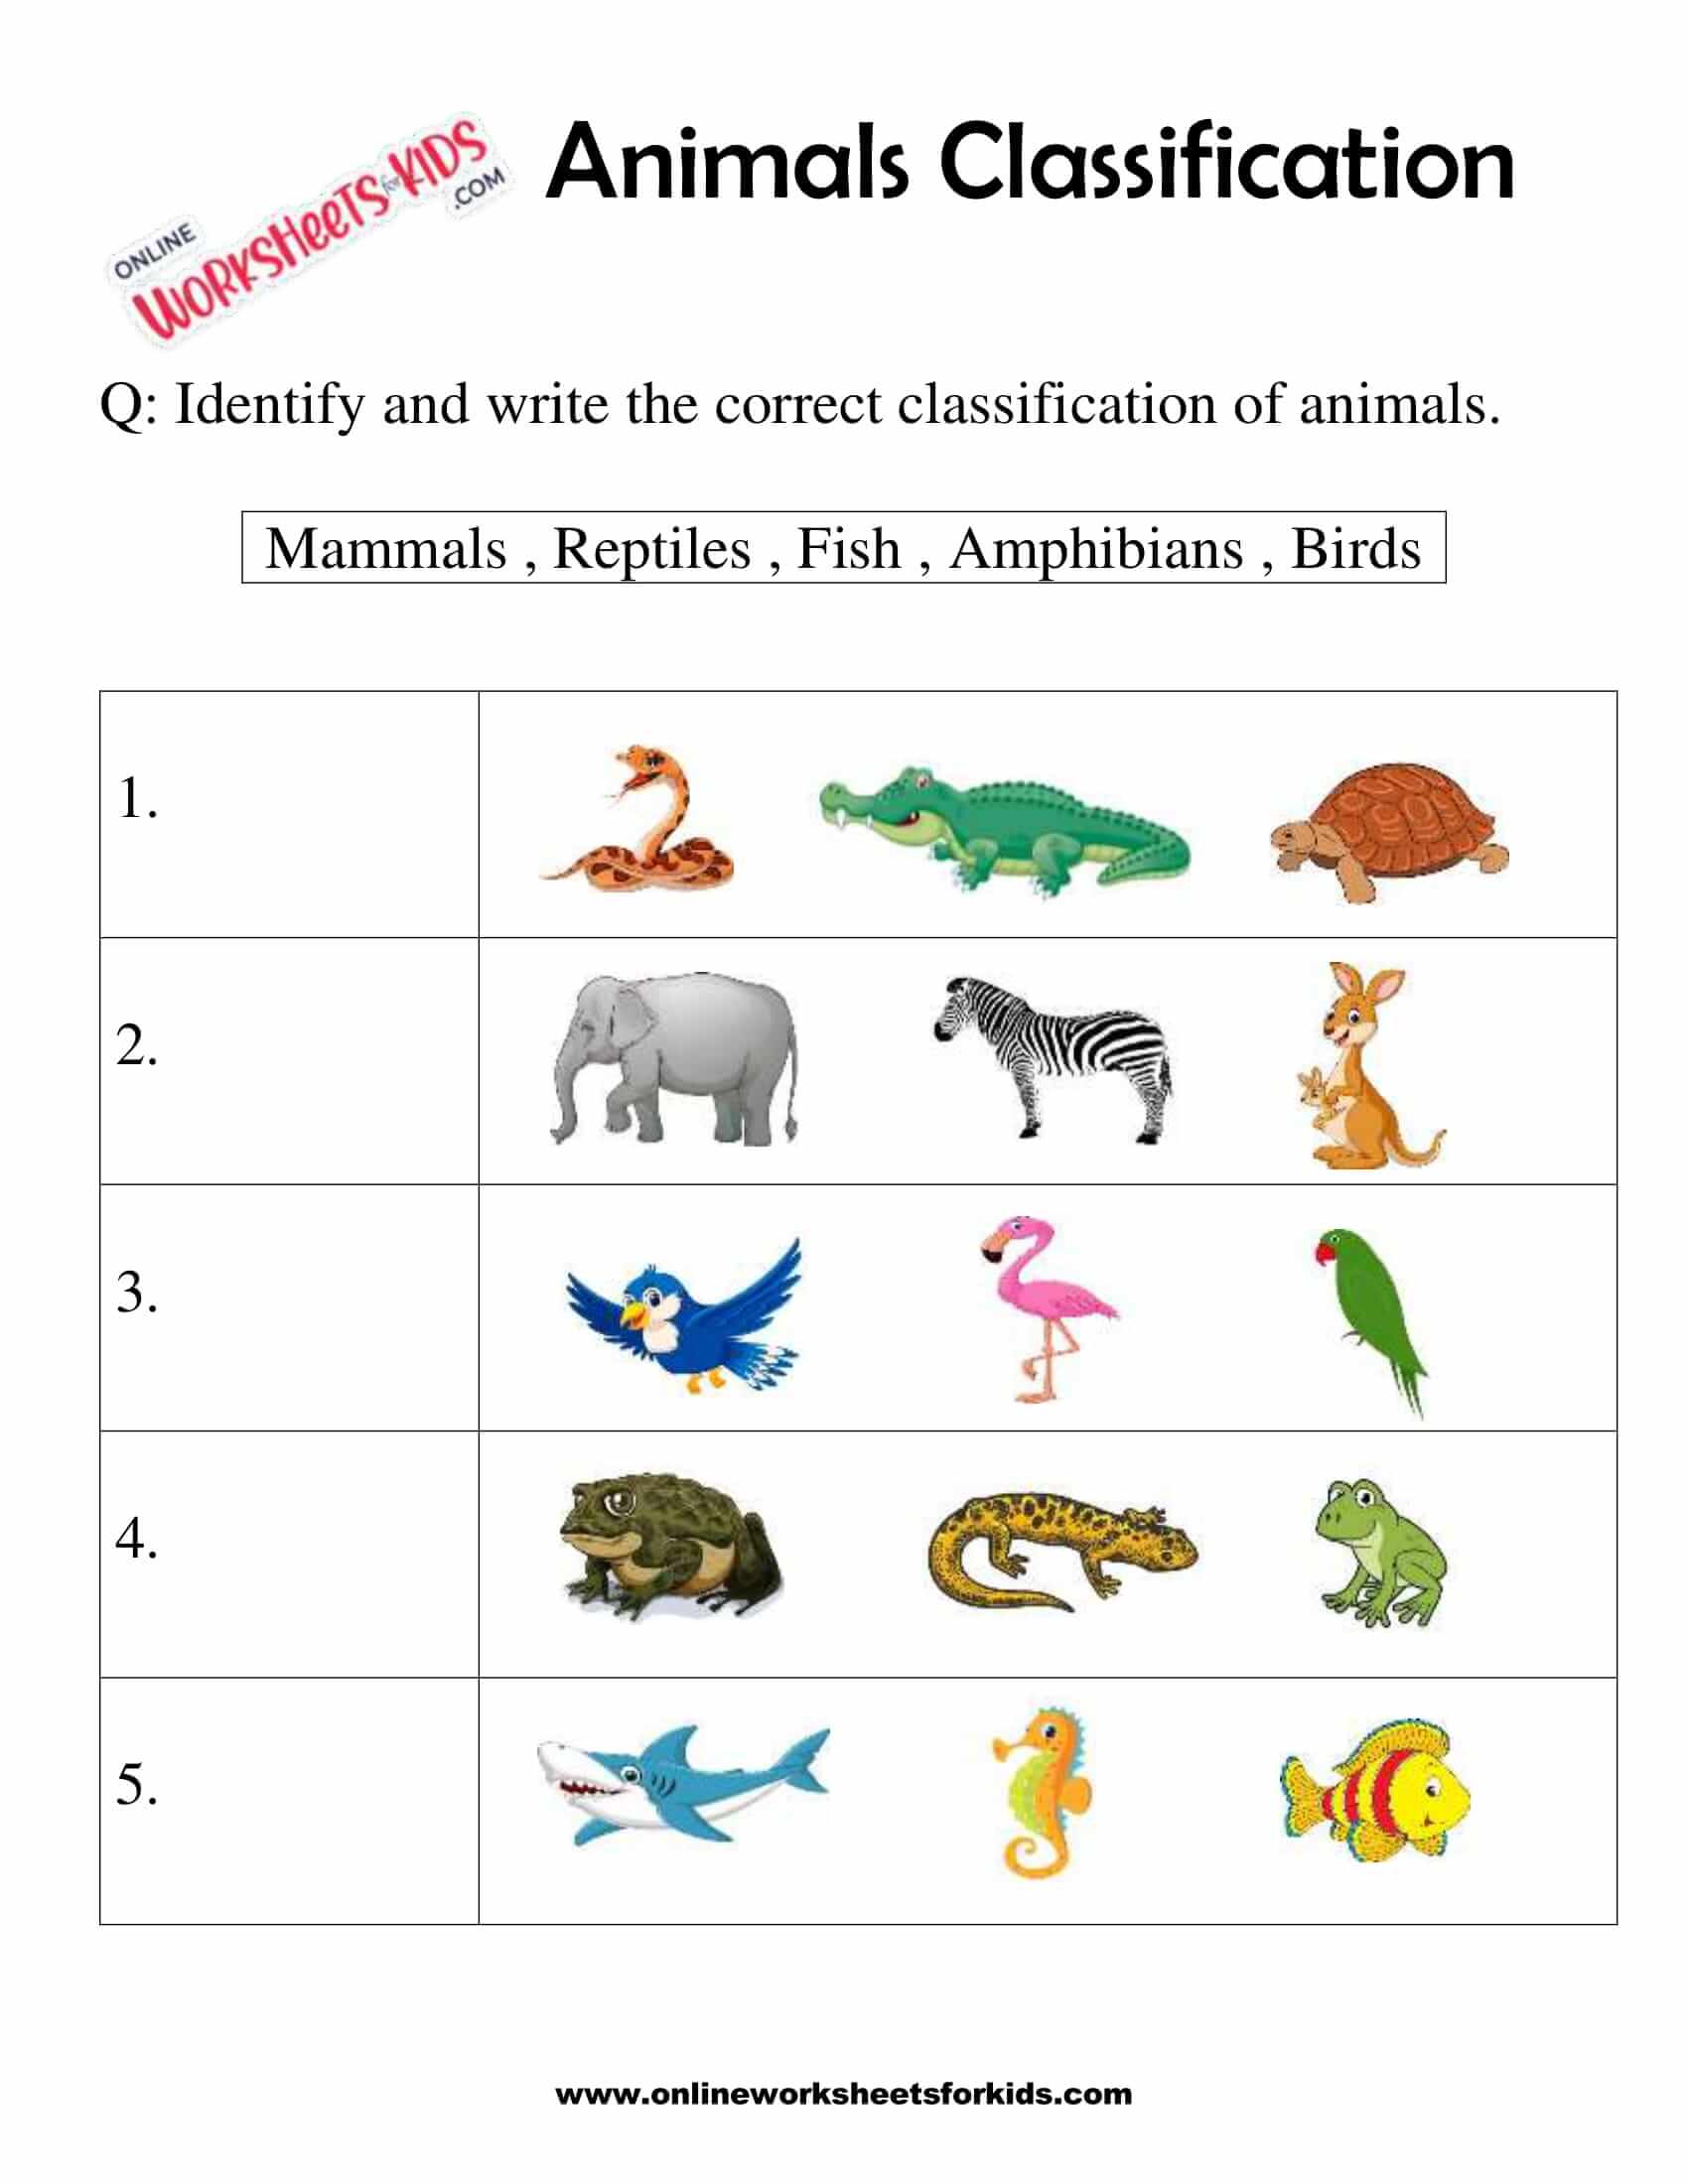 animals-classification-worksheet-for-1st-grade-2